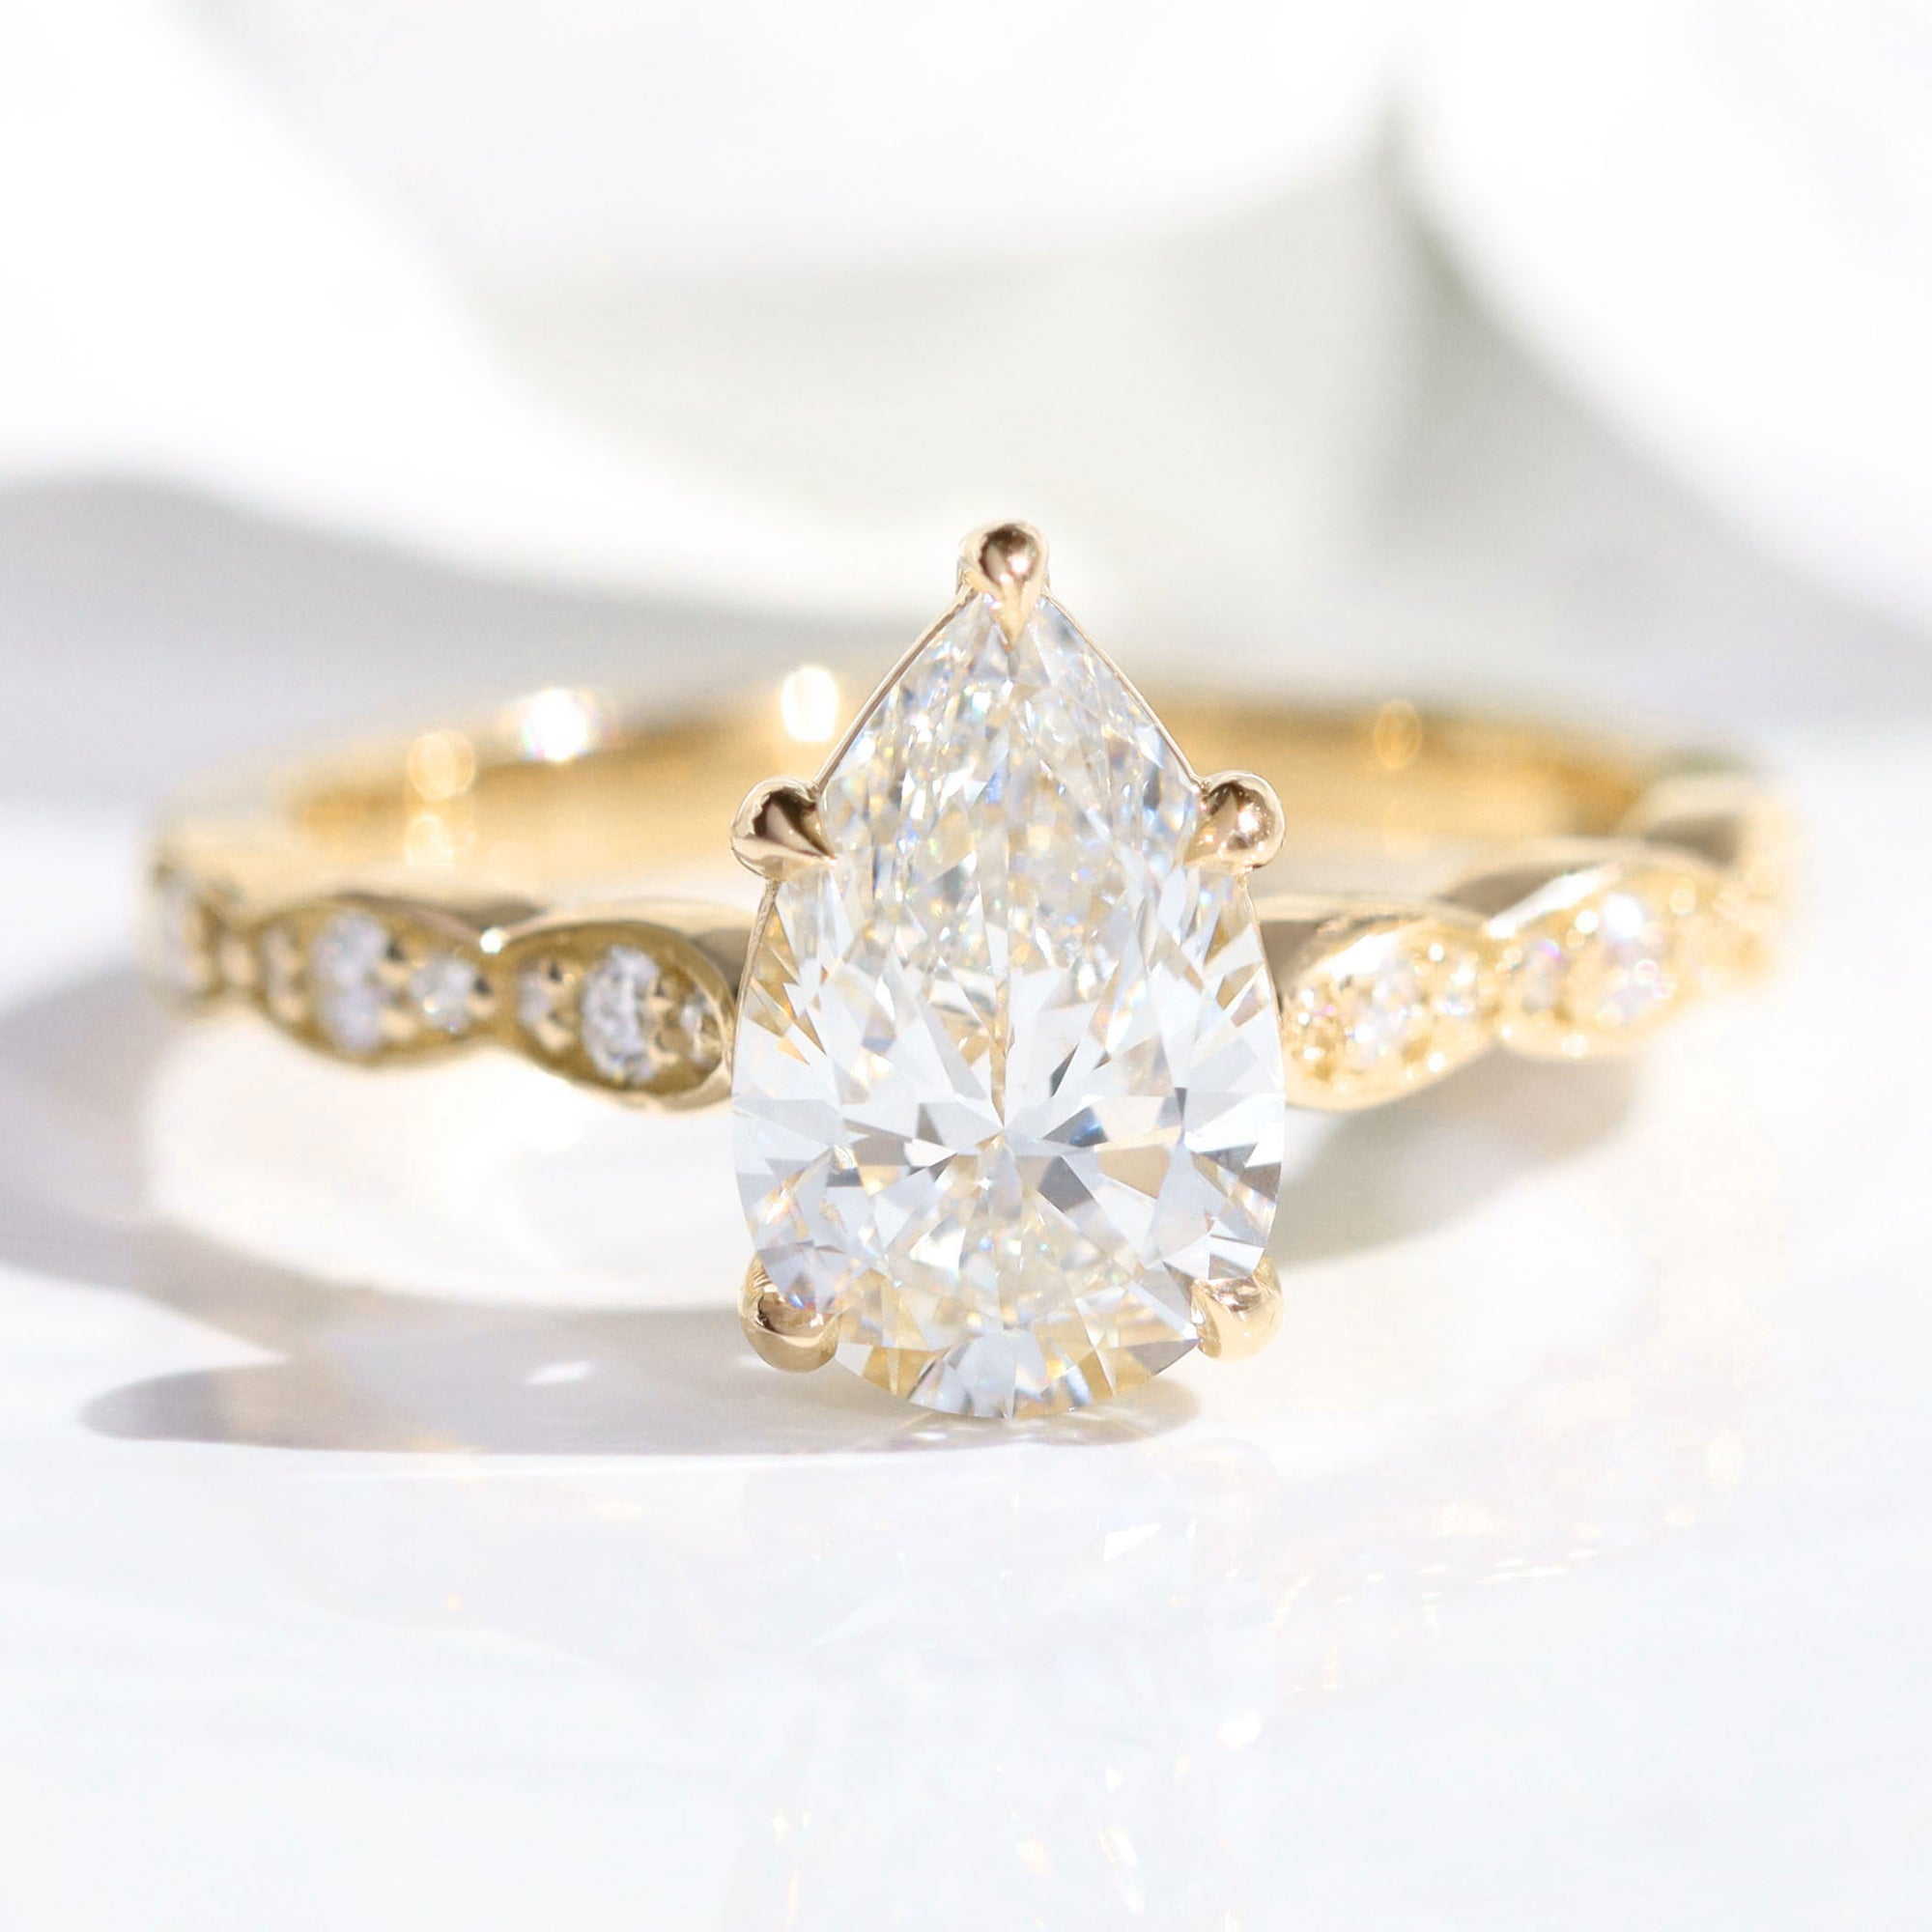 lab diamond ring yellow gold pear diamond solitaire engagement ring La More Design Jewelry